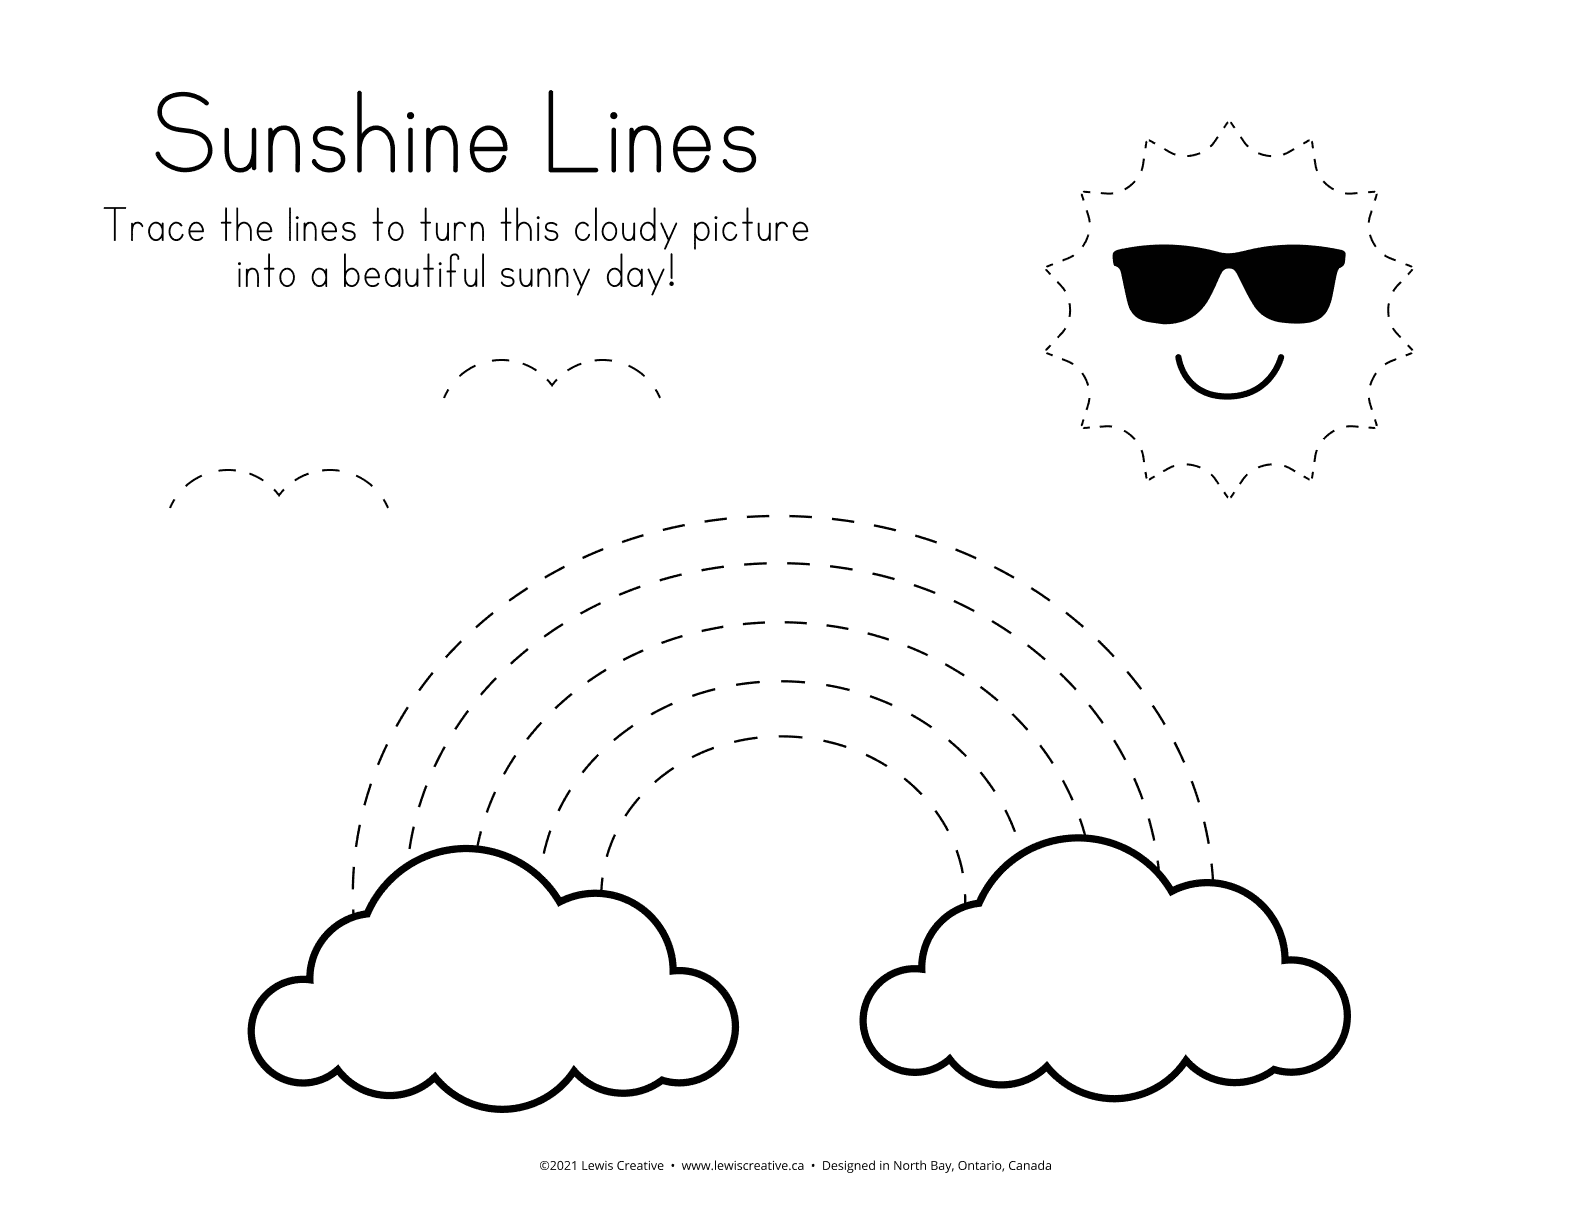 Summer Themed Follow the lines activity - Free Worksheet - Lewis Creative